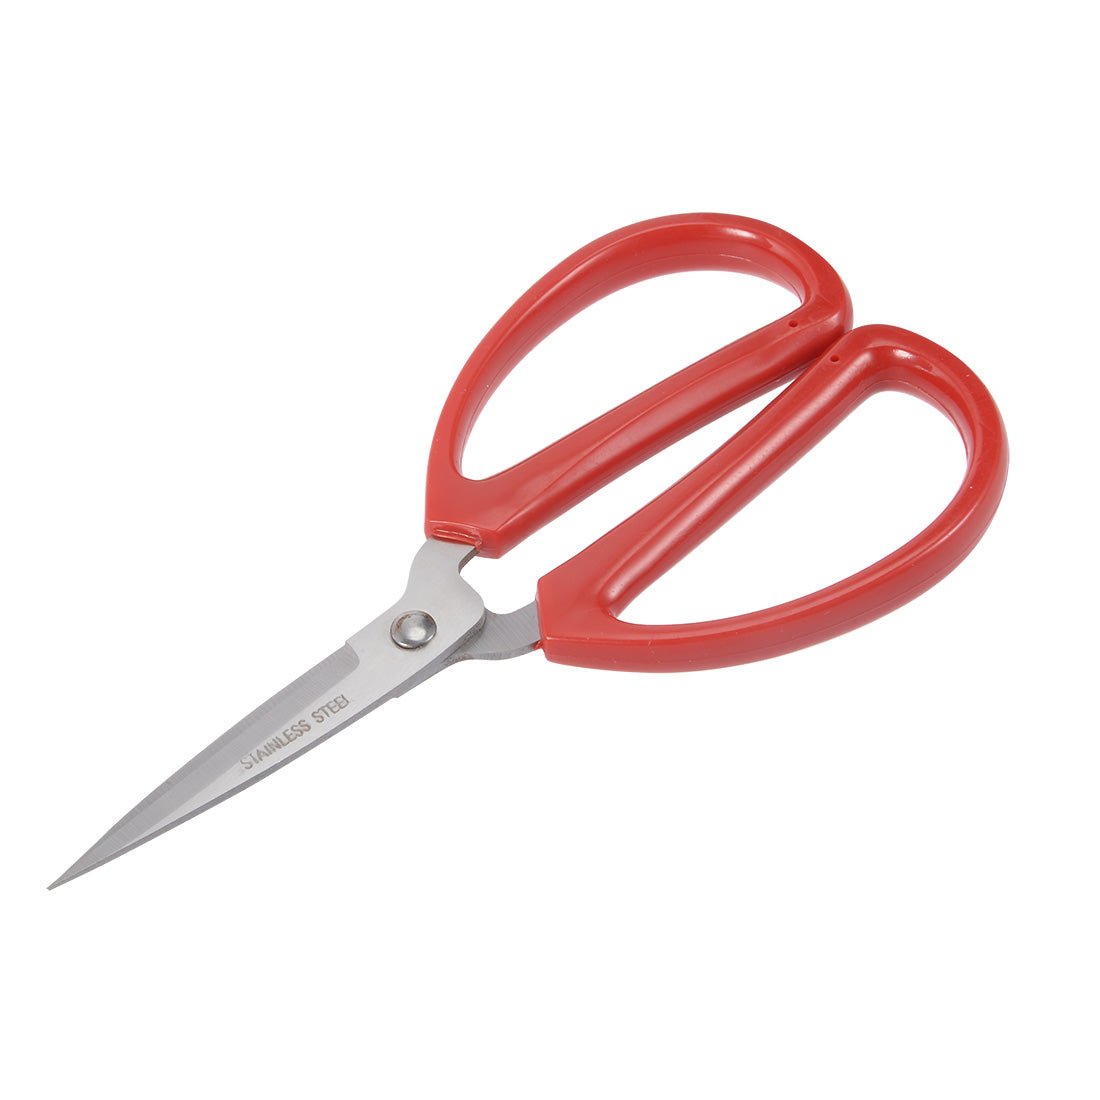 uxcell Uxcell 6 Inch Stainless Steel Scissor for Office Home Cutting, Straight Red Handle